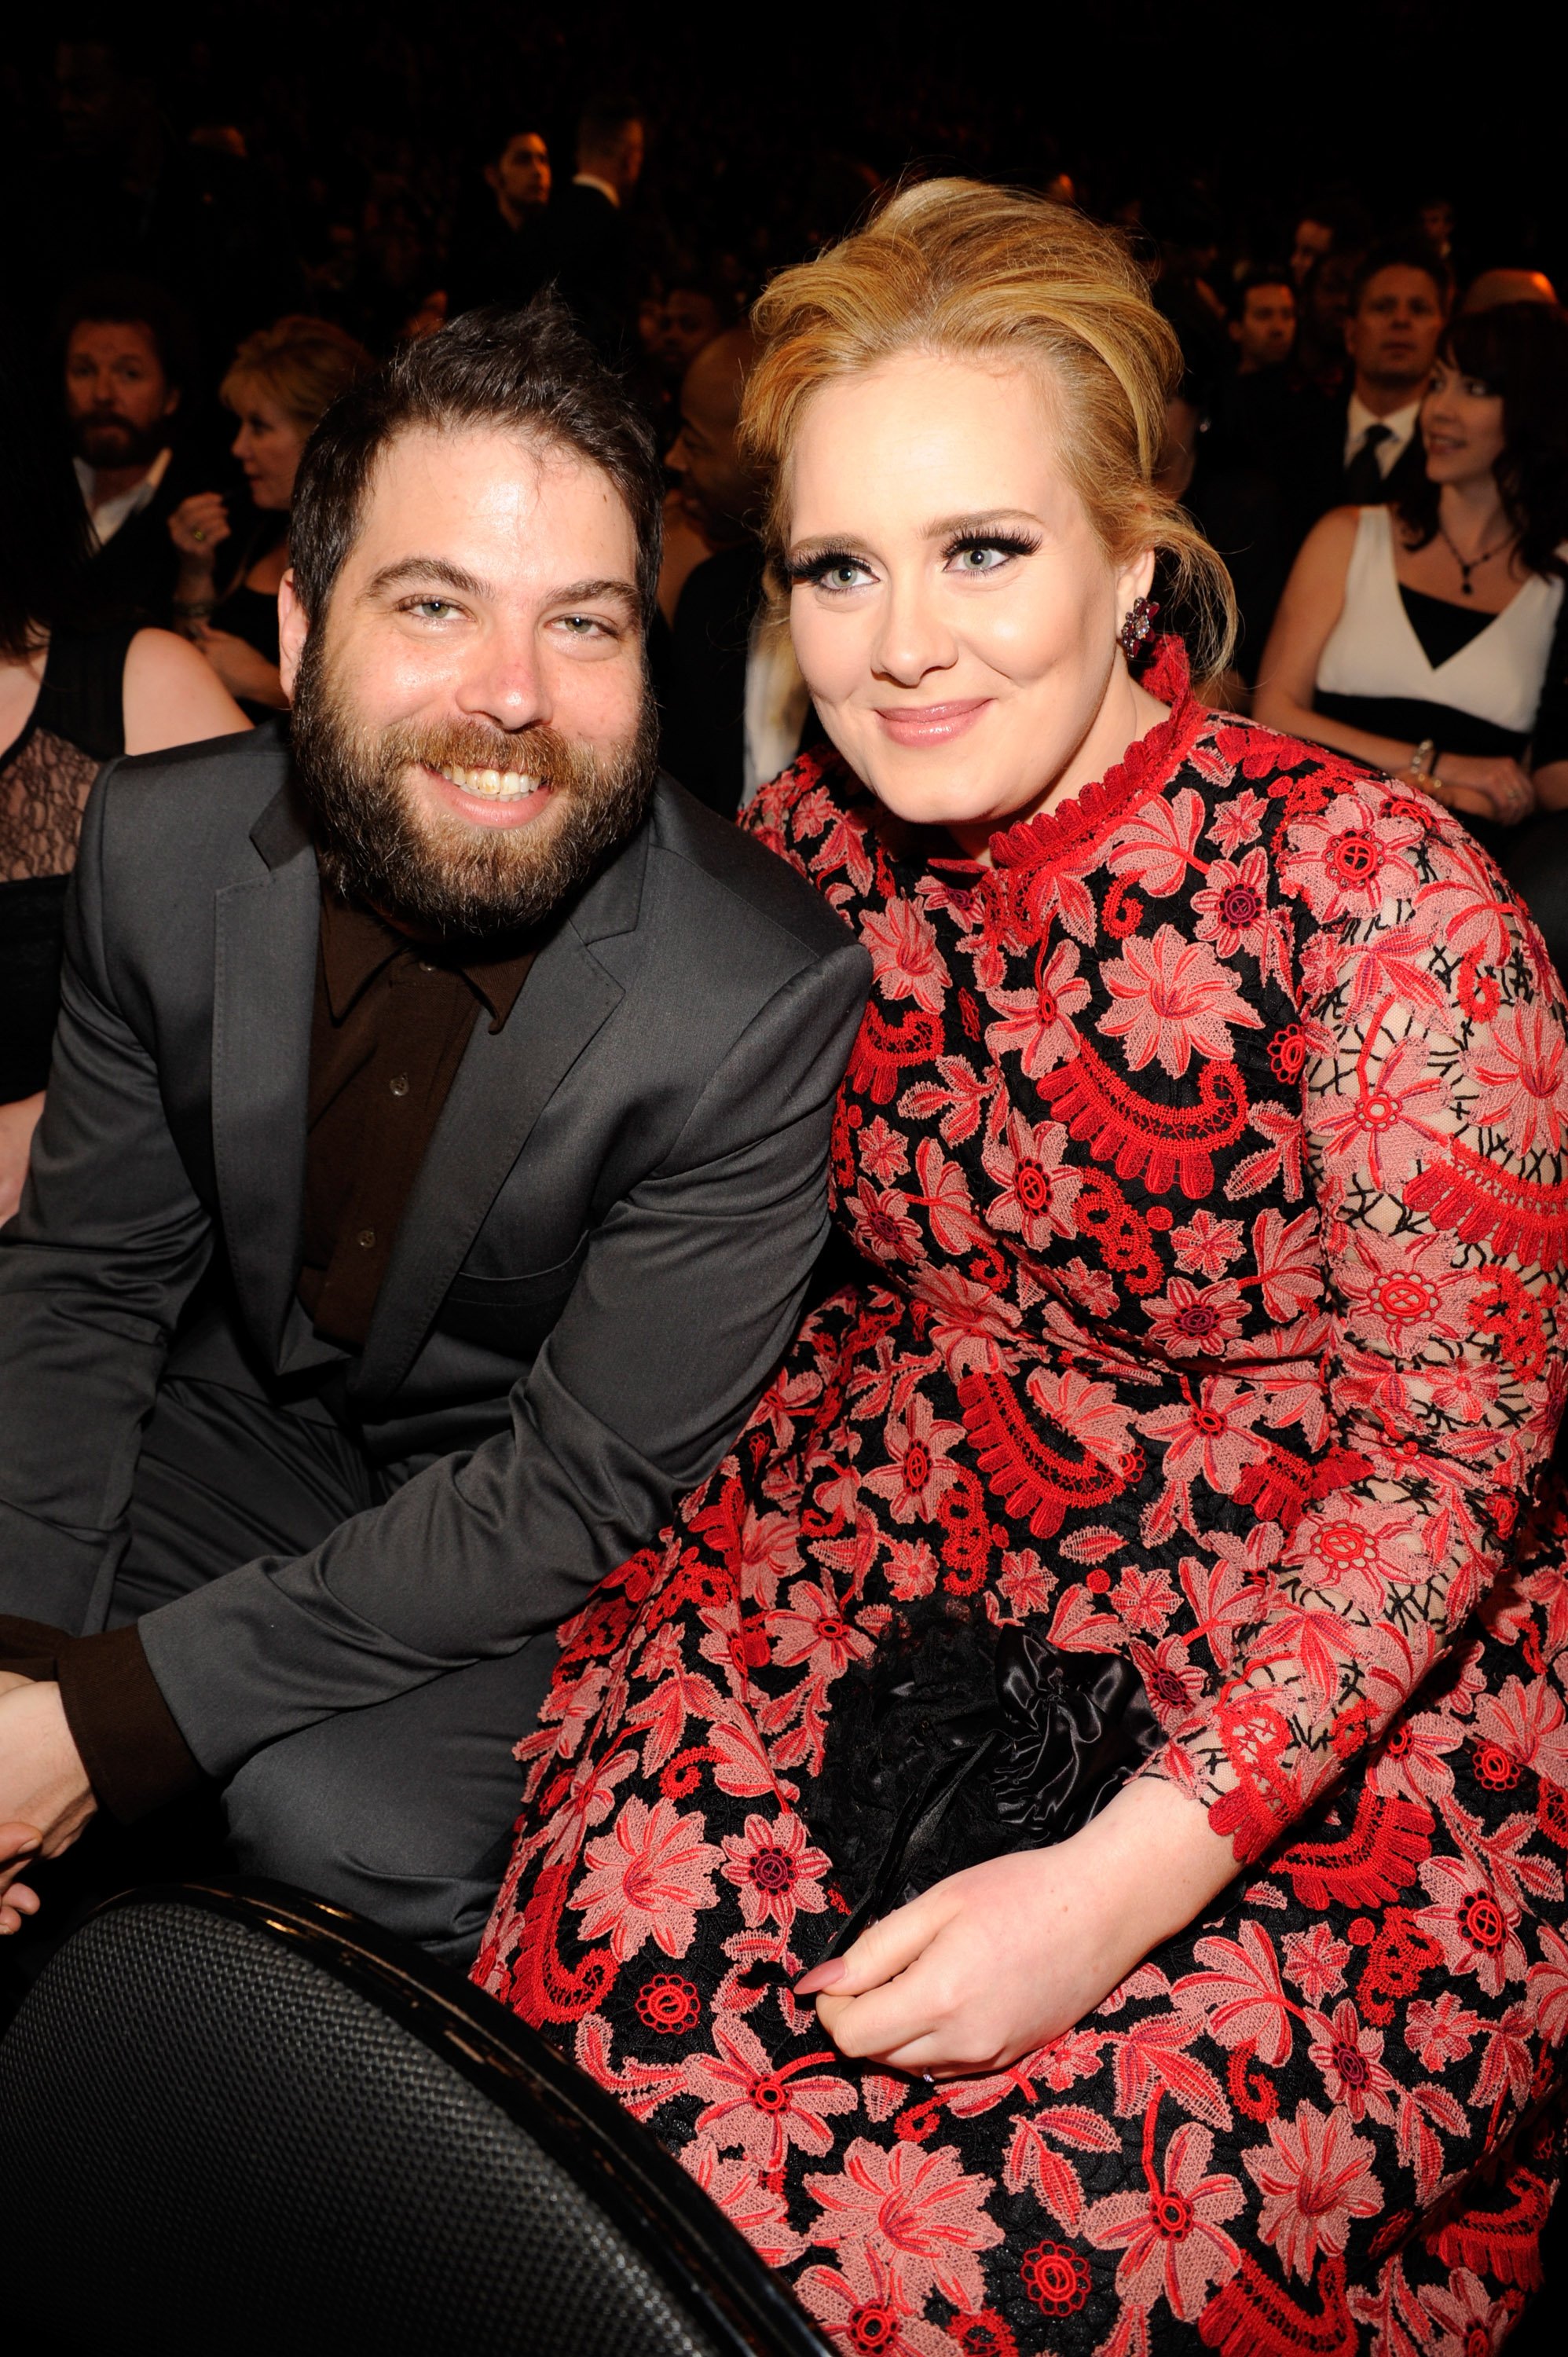 Adele and Simon Konecki during the 55th Annual GRAMMY Awards at STAPLES Center on February 10, 2013, in Los Angeles, California. | Source: Getty Images